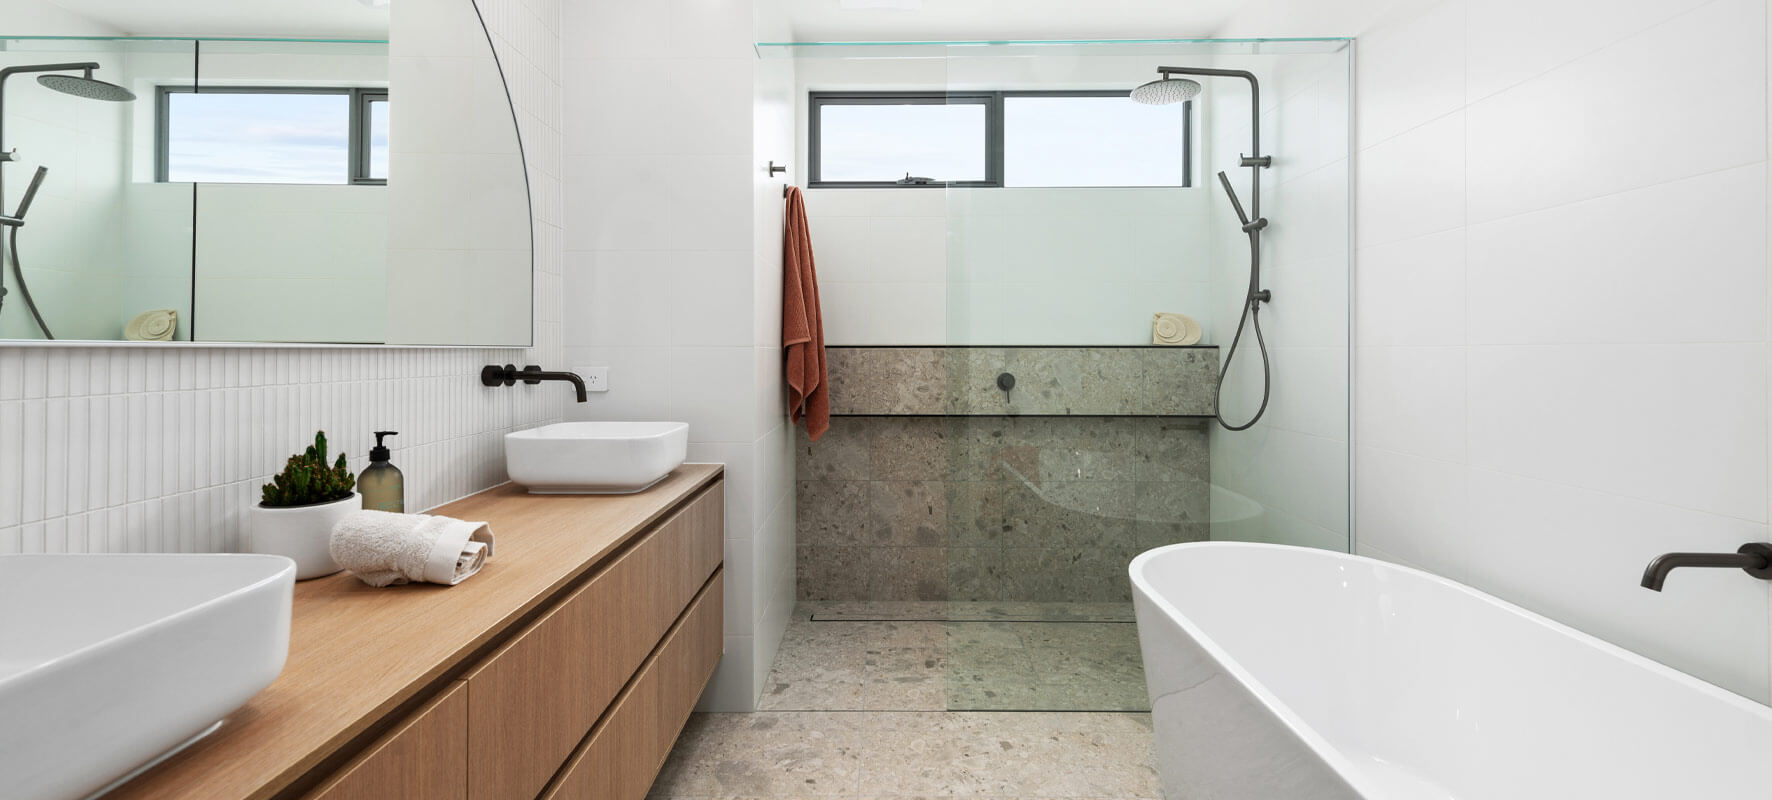 Photo of modern bathroom with white bathtub, timber vanity and white sink, grey tiled shower with clear glass shower screen